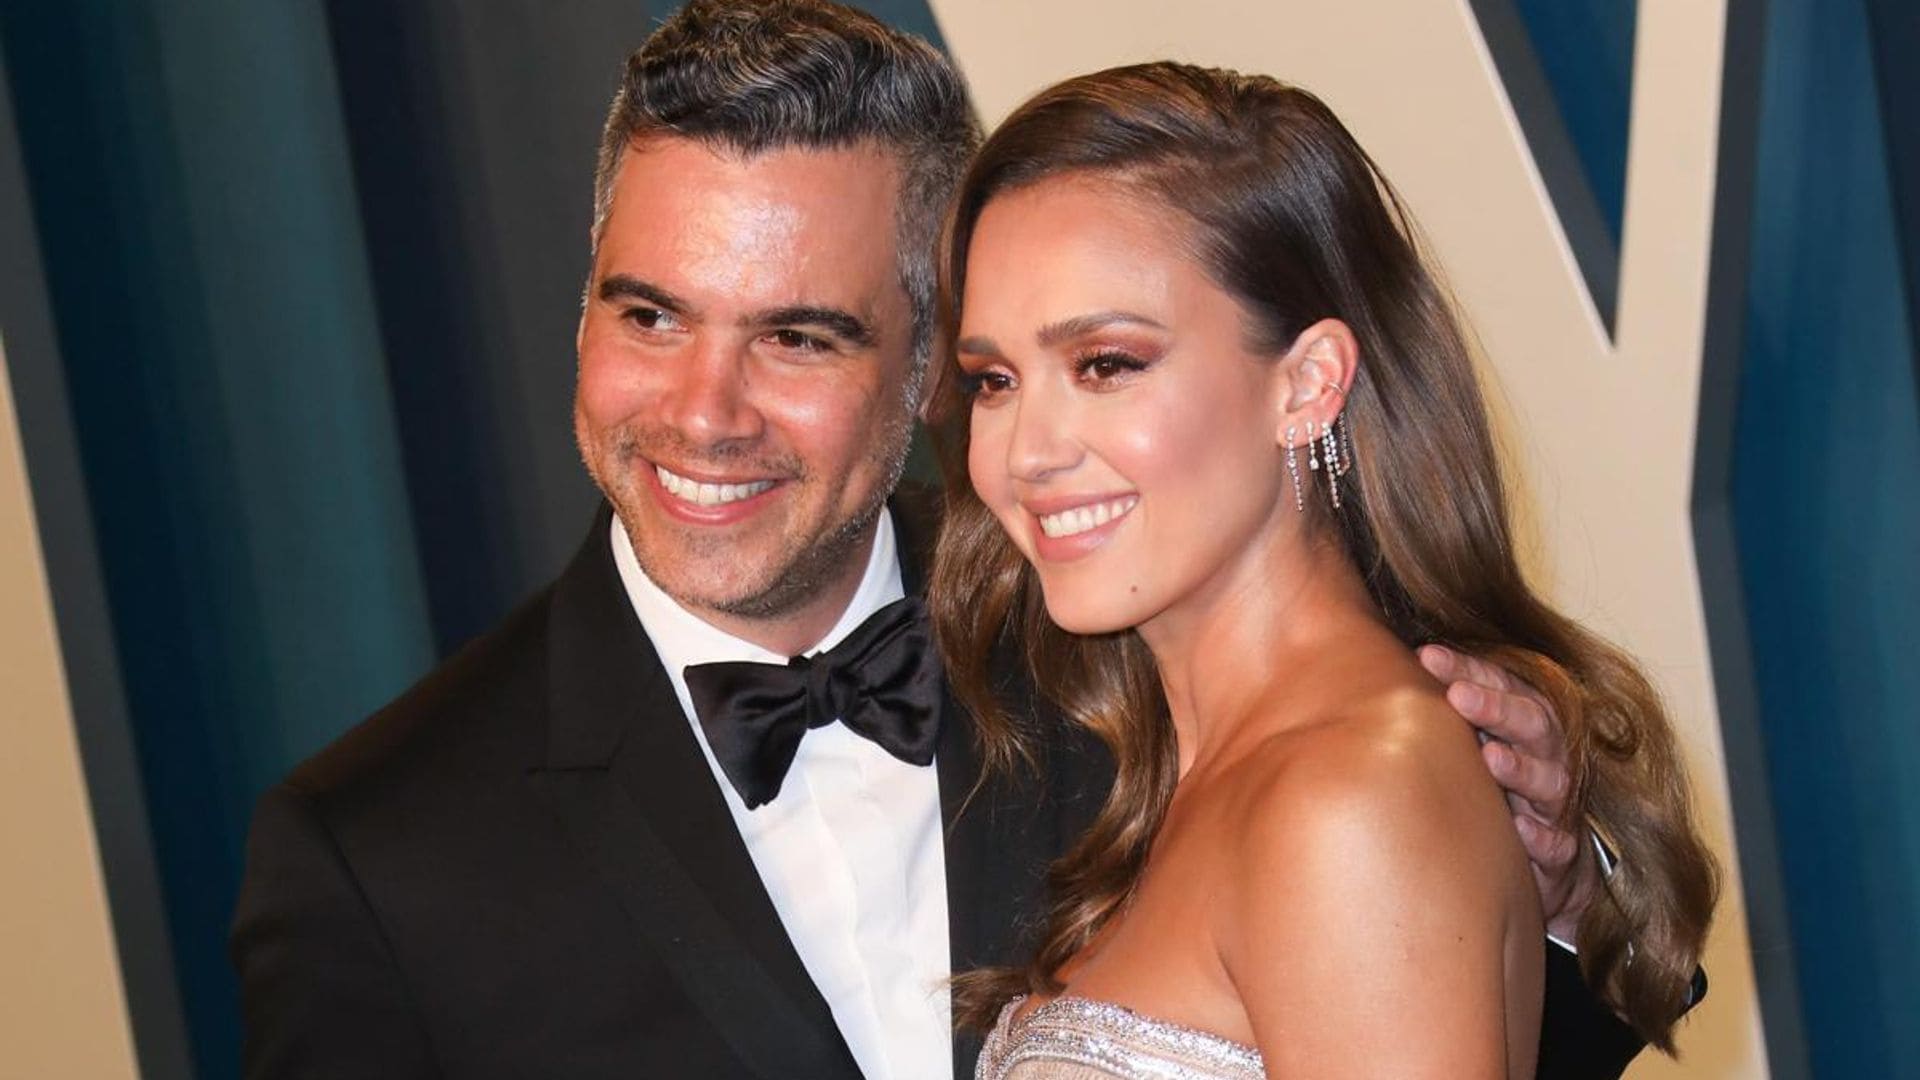 Jessica Alba and Cash Warren celebrate their wedding anniversary by reflecting on marriage complexities